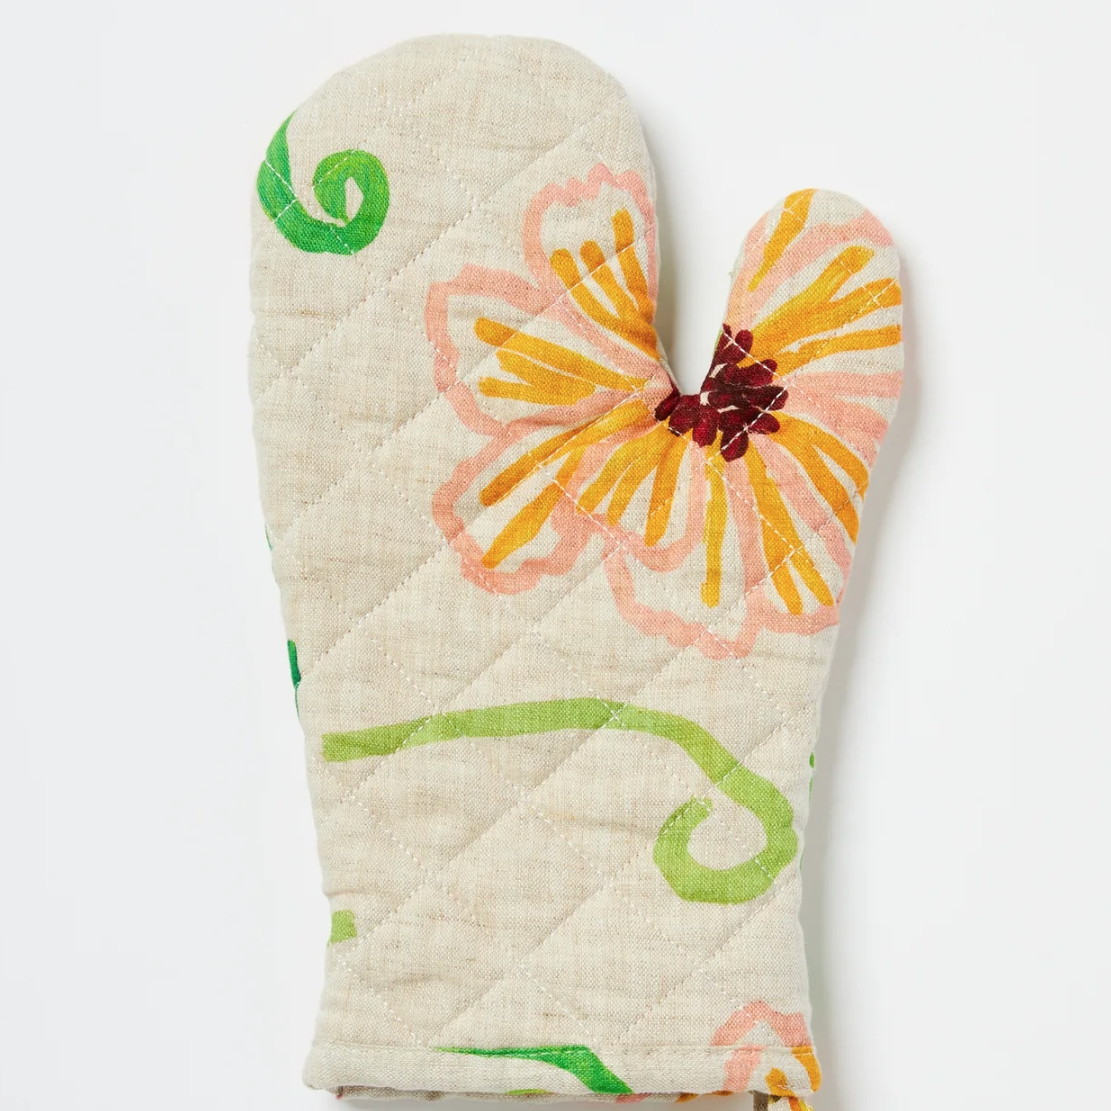 BONNIE AND NEIL OVEN MITT: TENDRIL